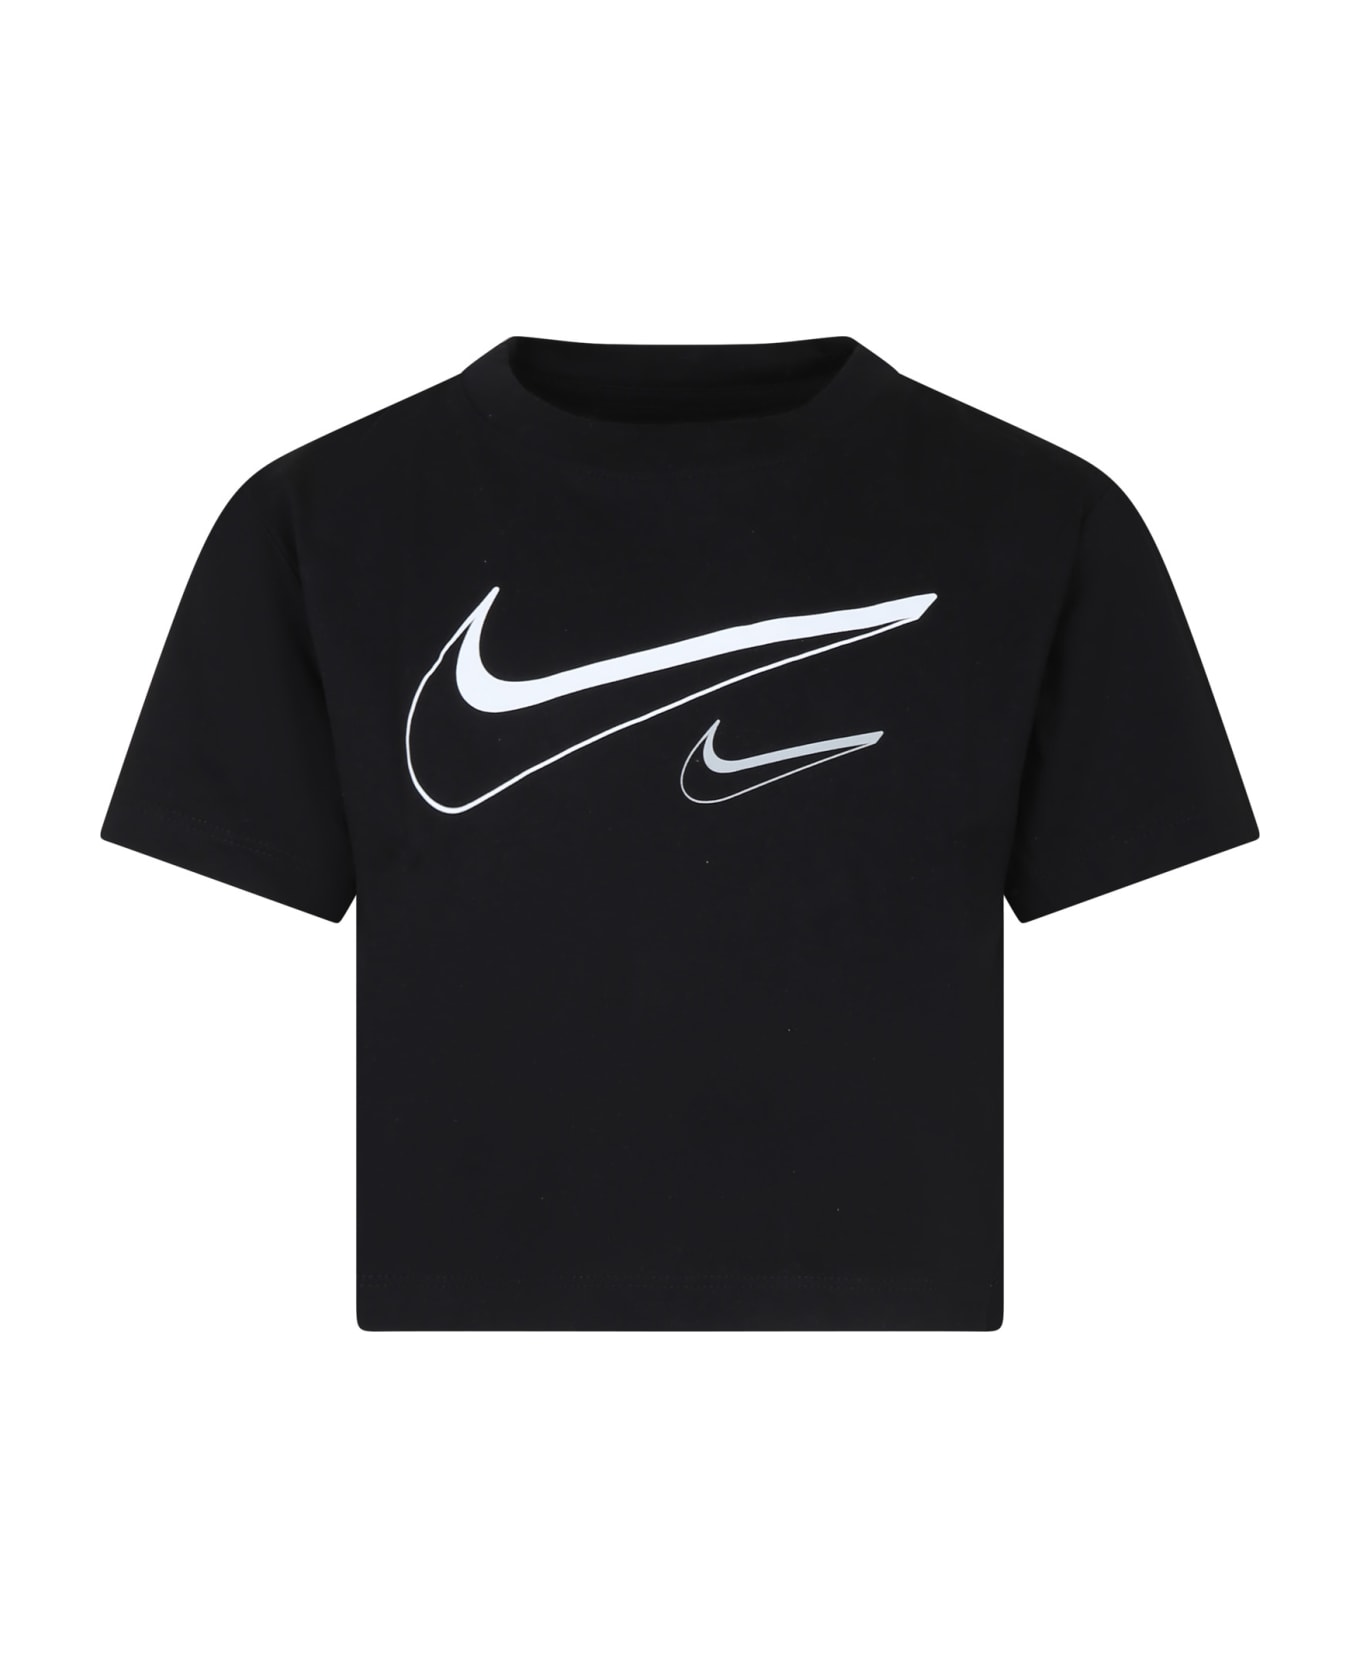 Nike Black T-shirt For Girl With Swoosh - Black